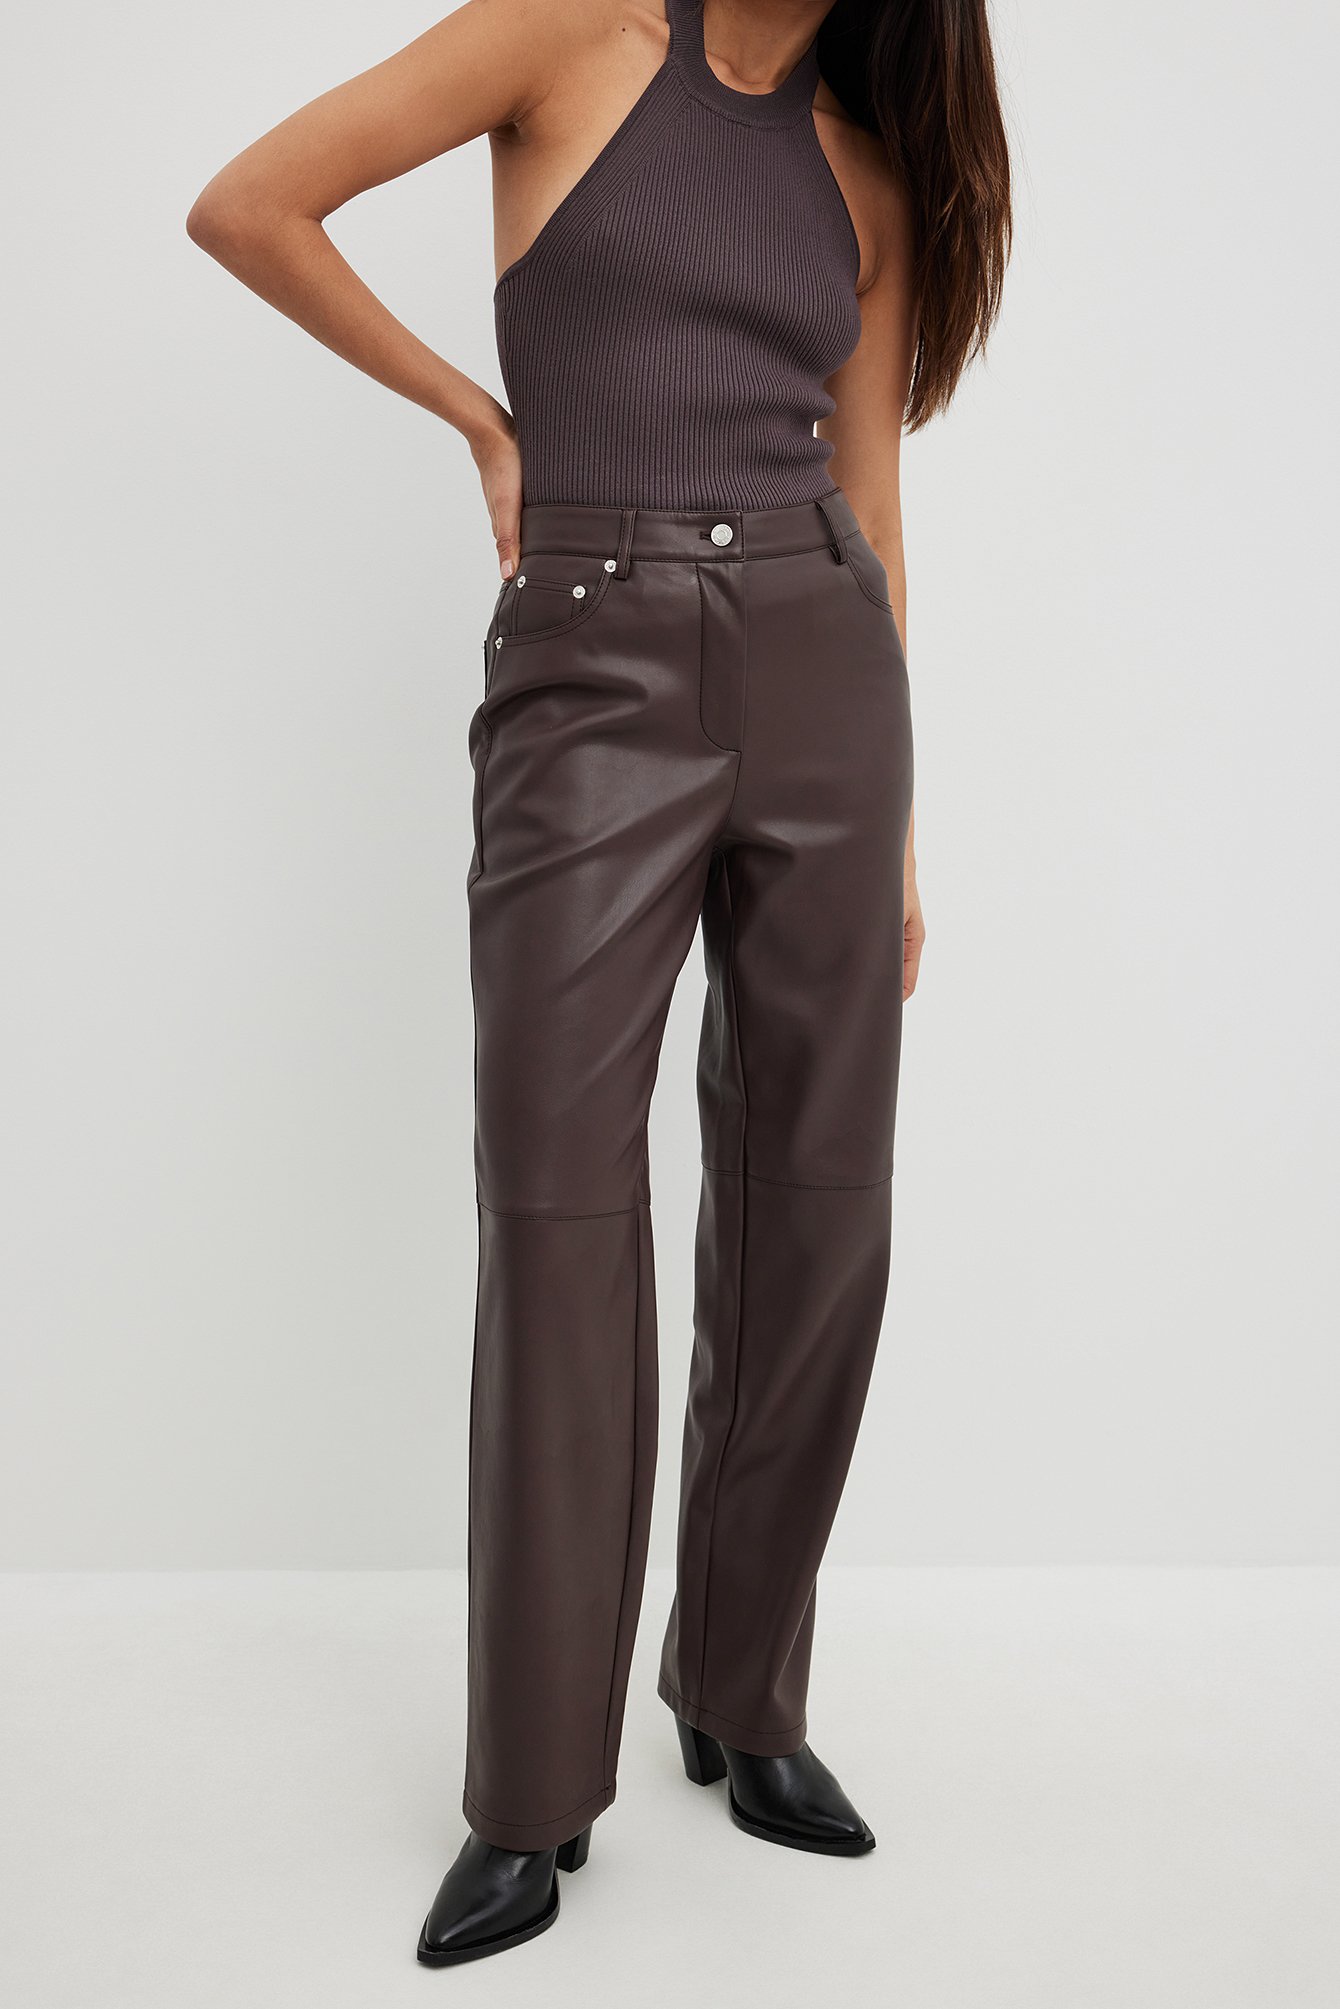 Casual High Waist Loose Long Trousers Goth Leather Pants - Power Day Sale